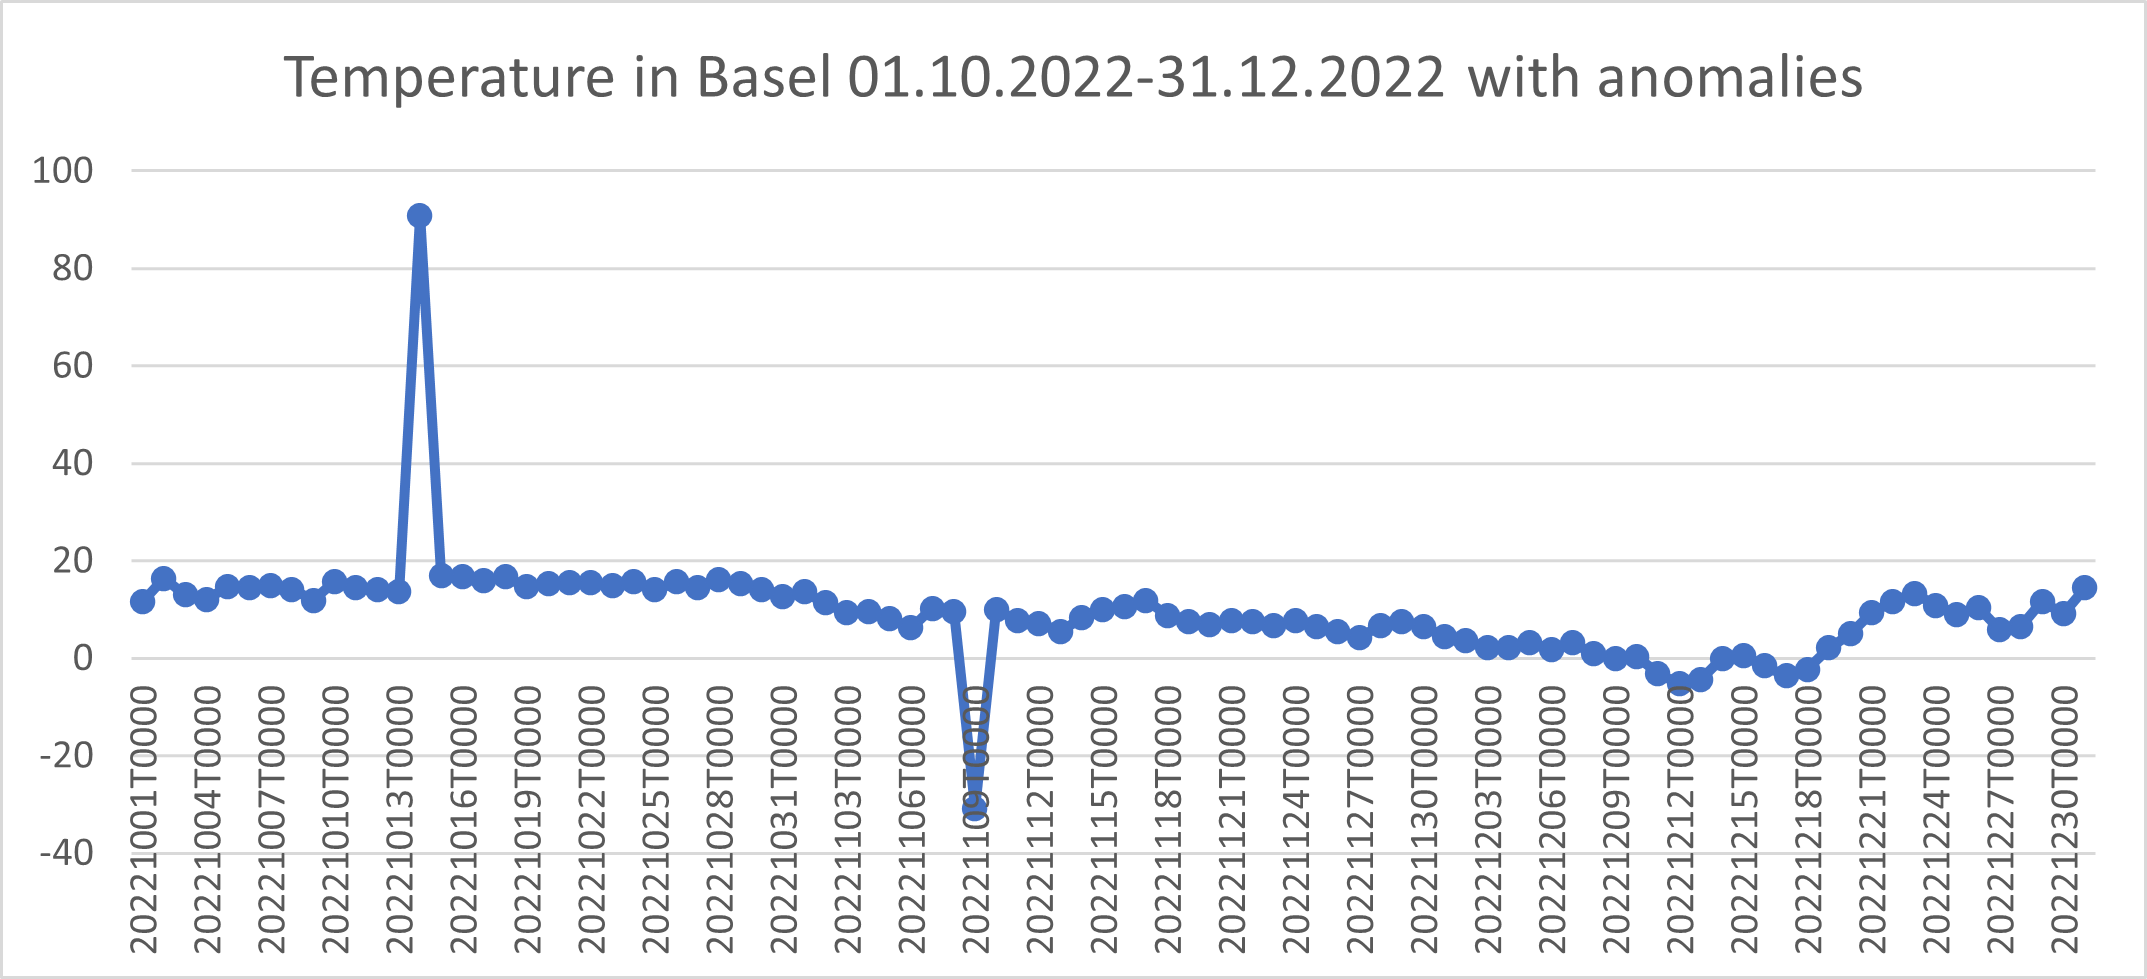 Graph showing Basel temperatures in 2022 with anomalies added